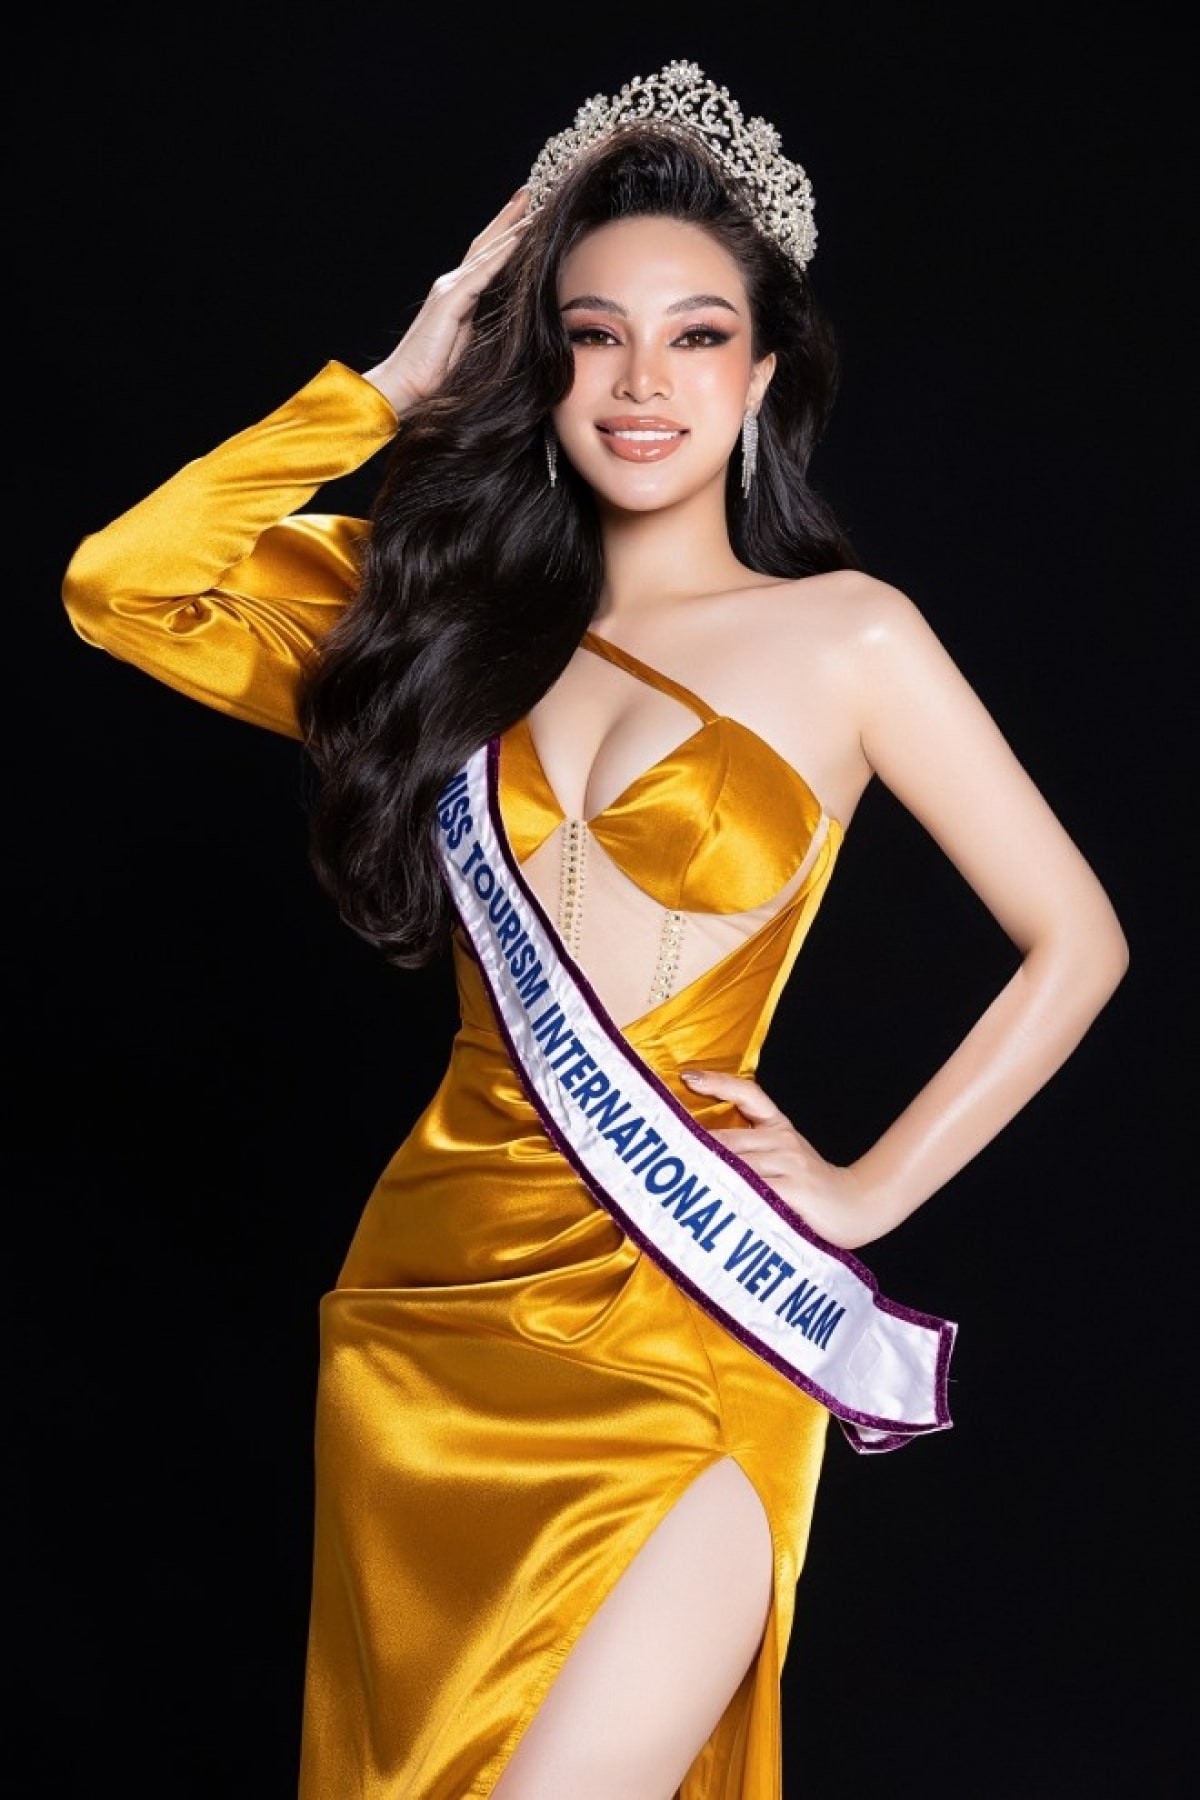 Well-deserved Reputation for Vietnam at Global Beauty Competitions